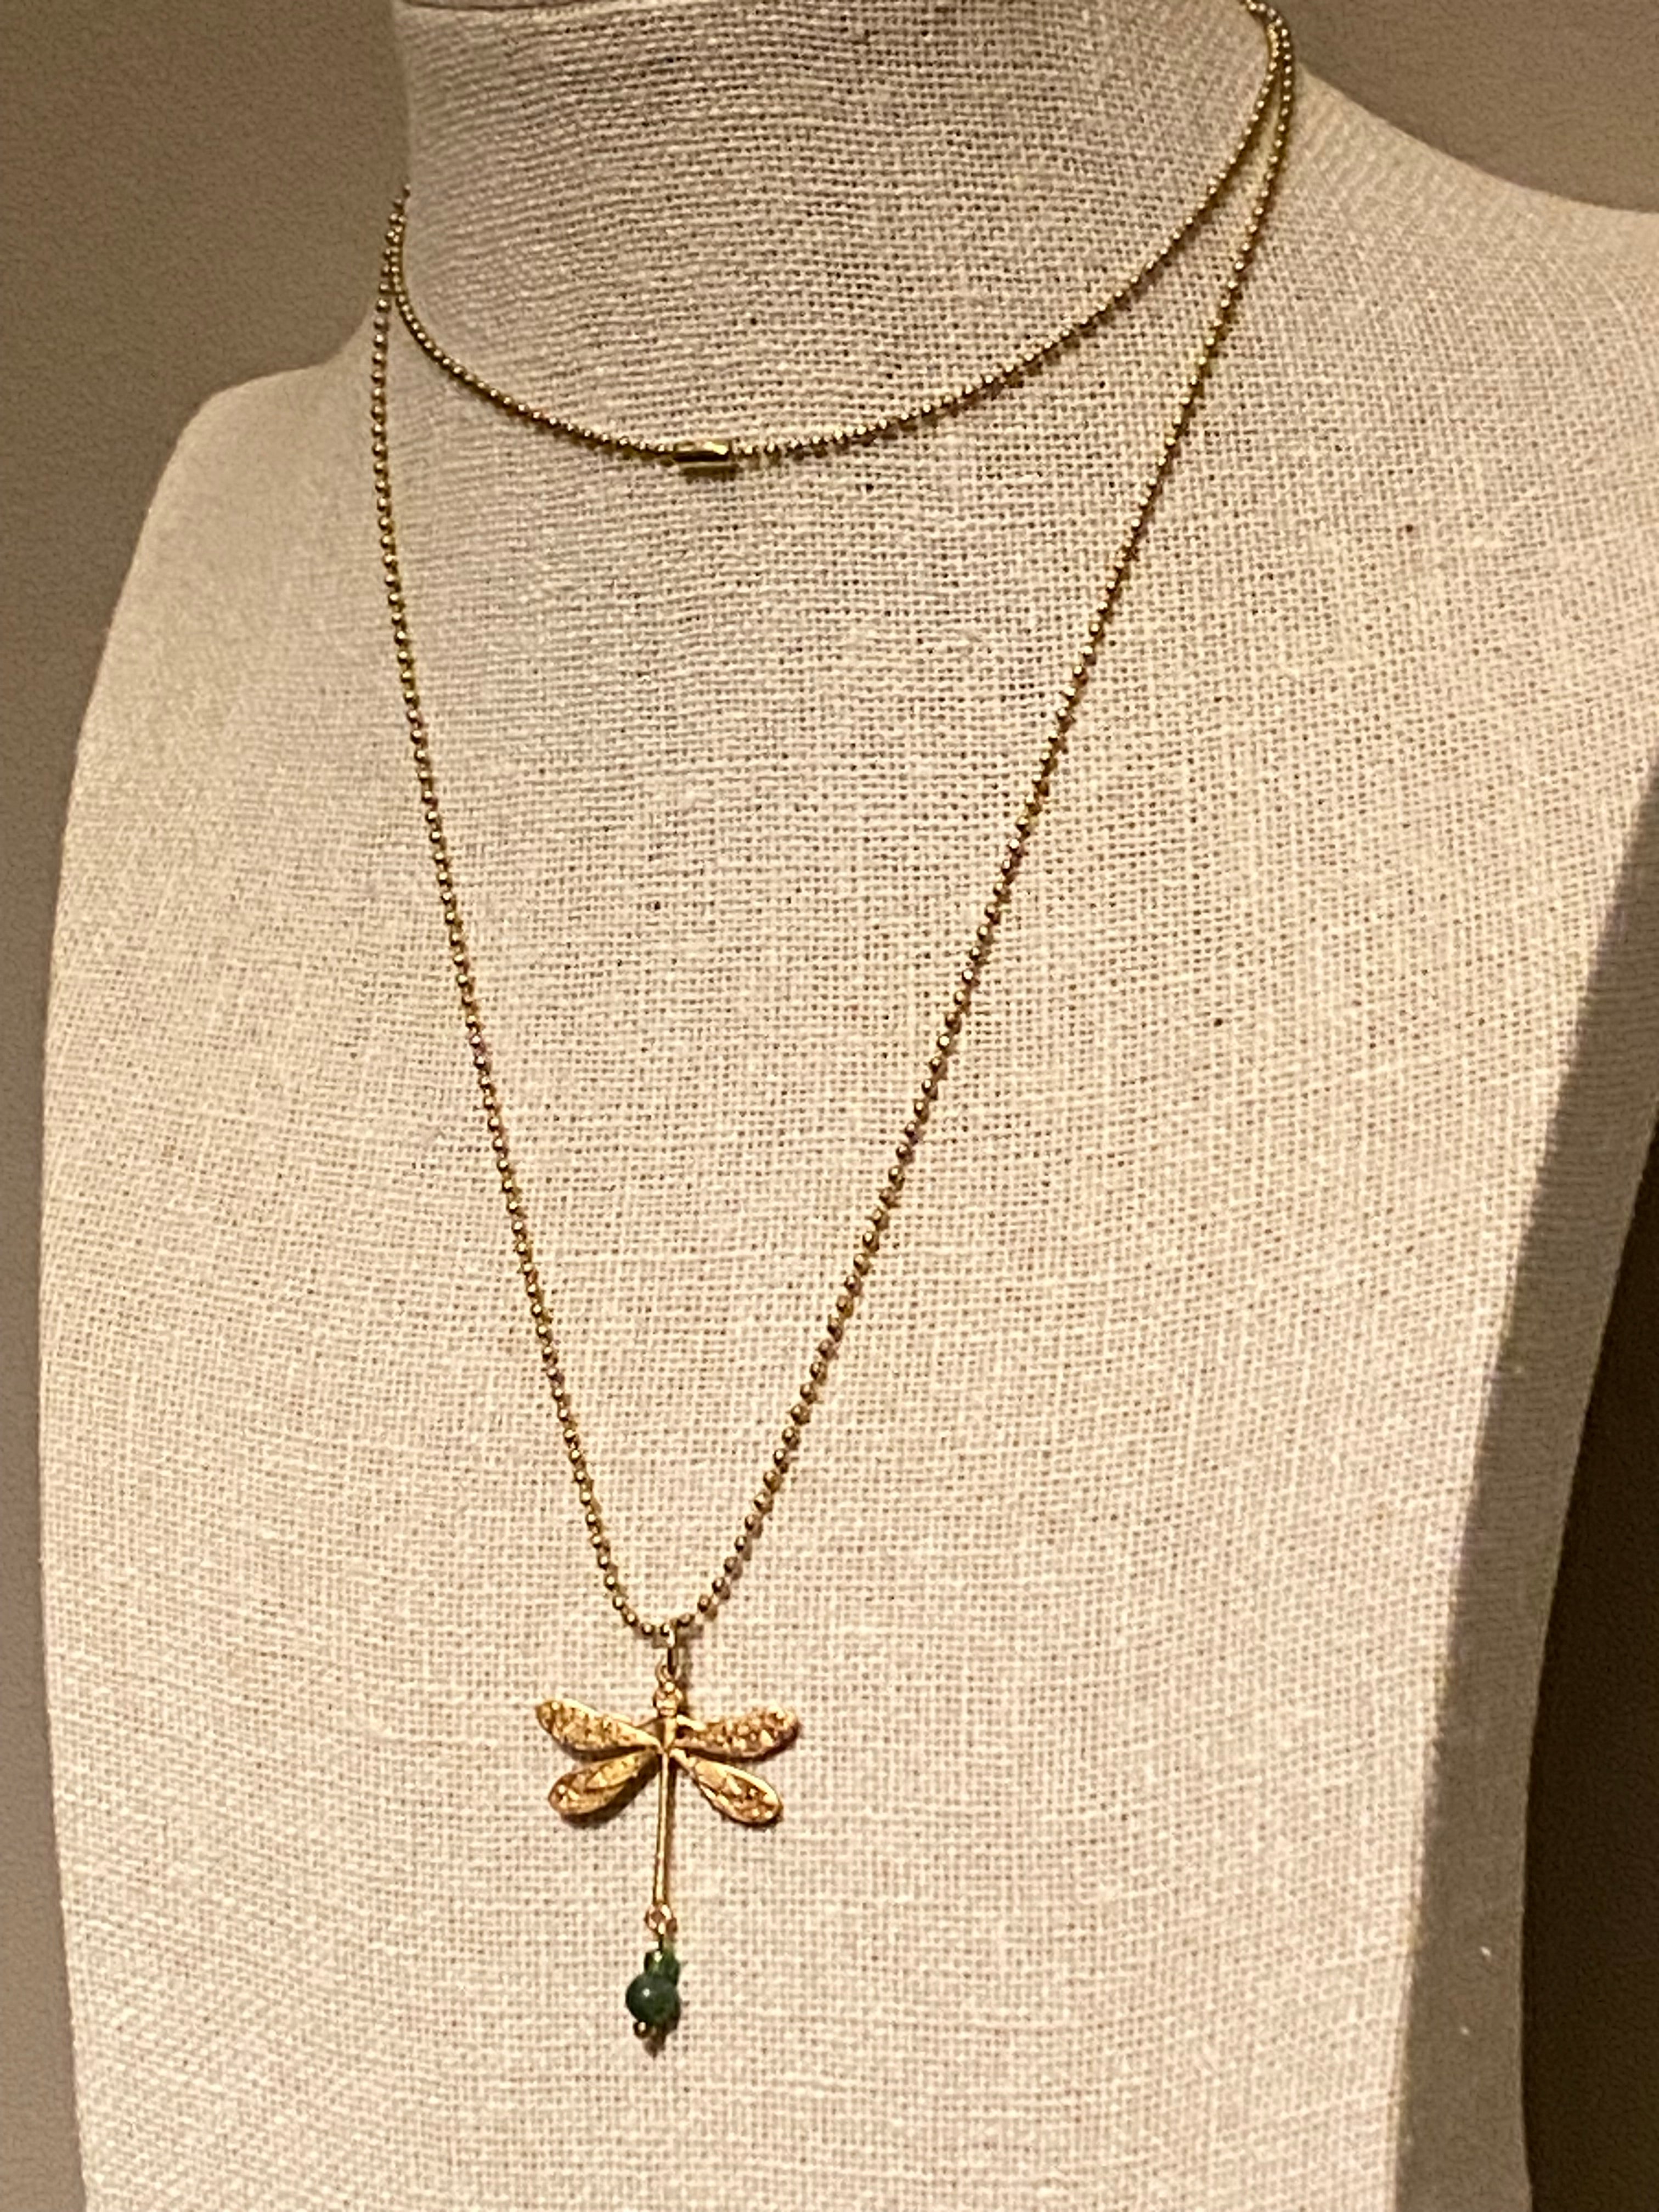 Dragonfly necklace green